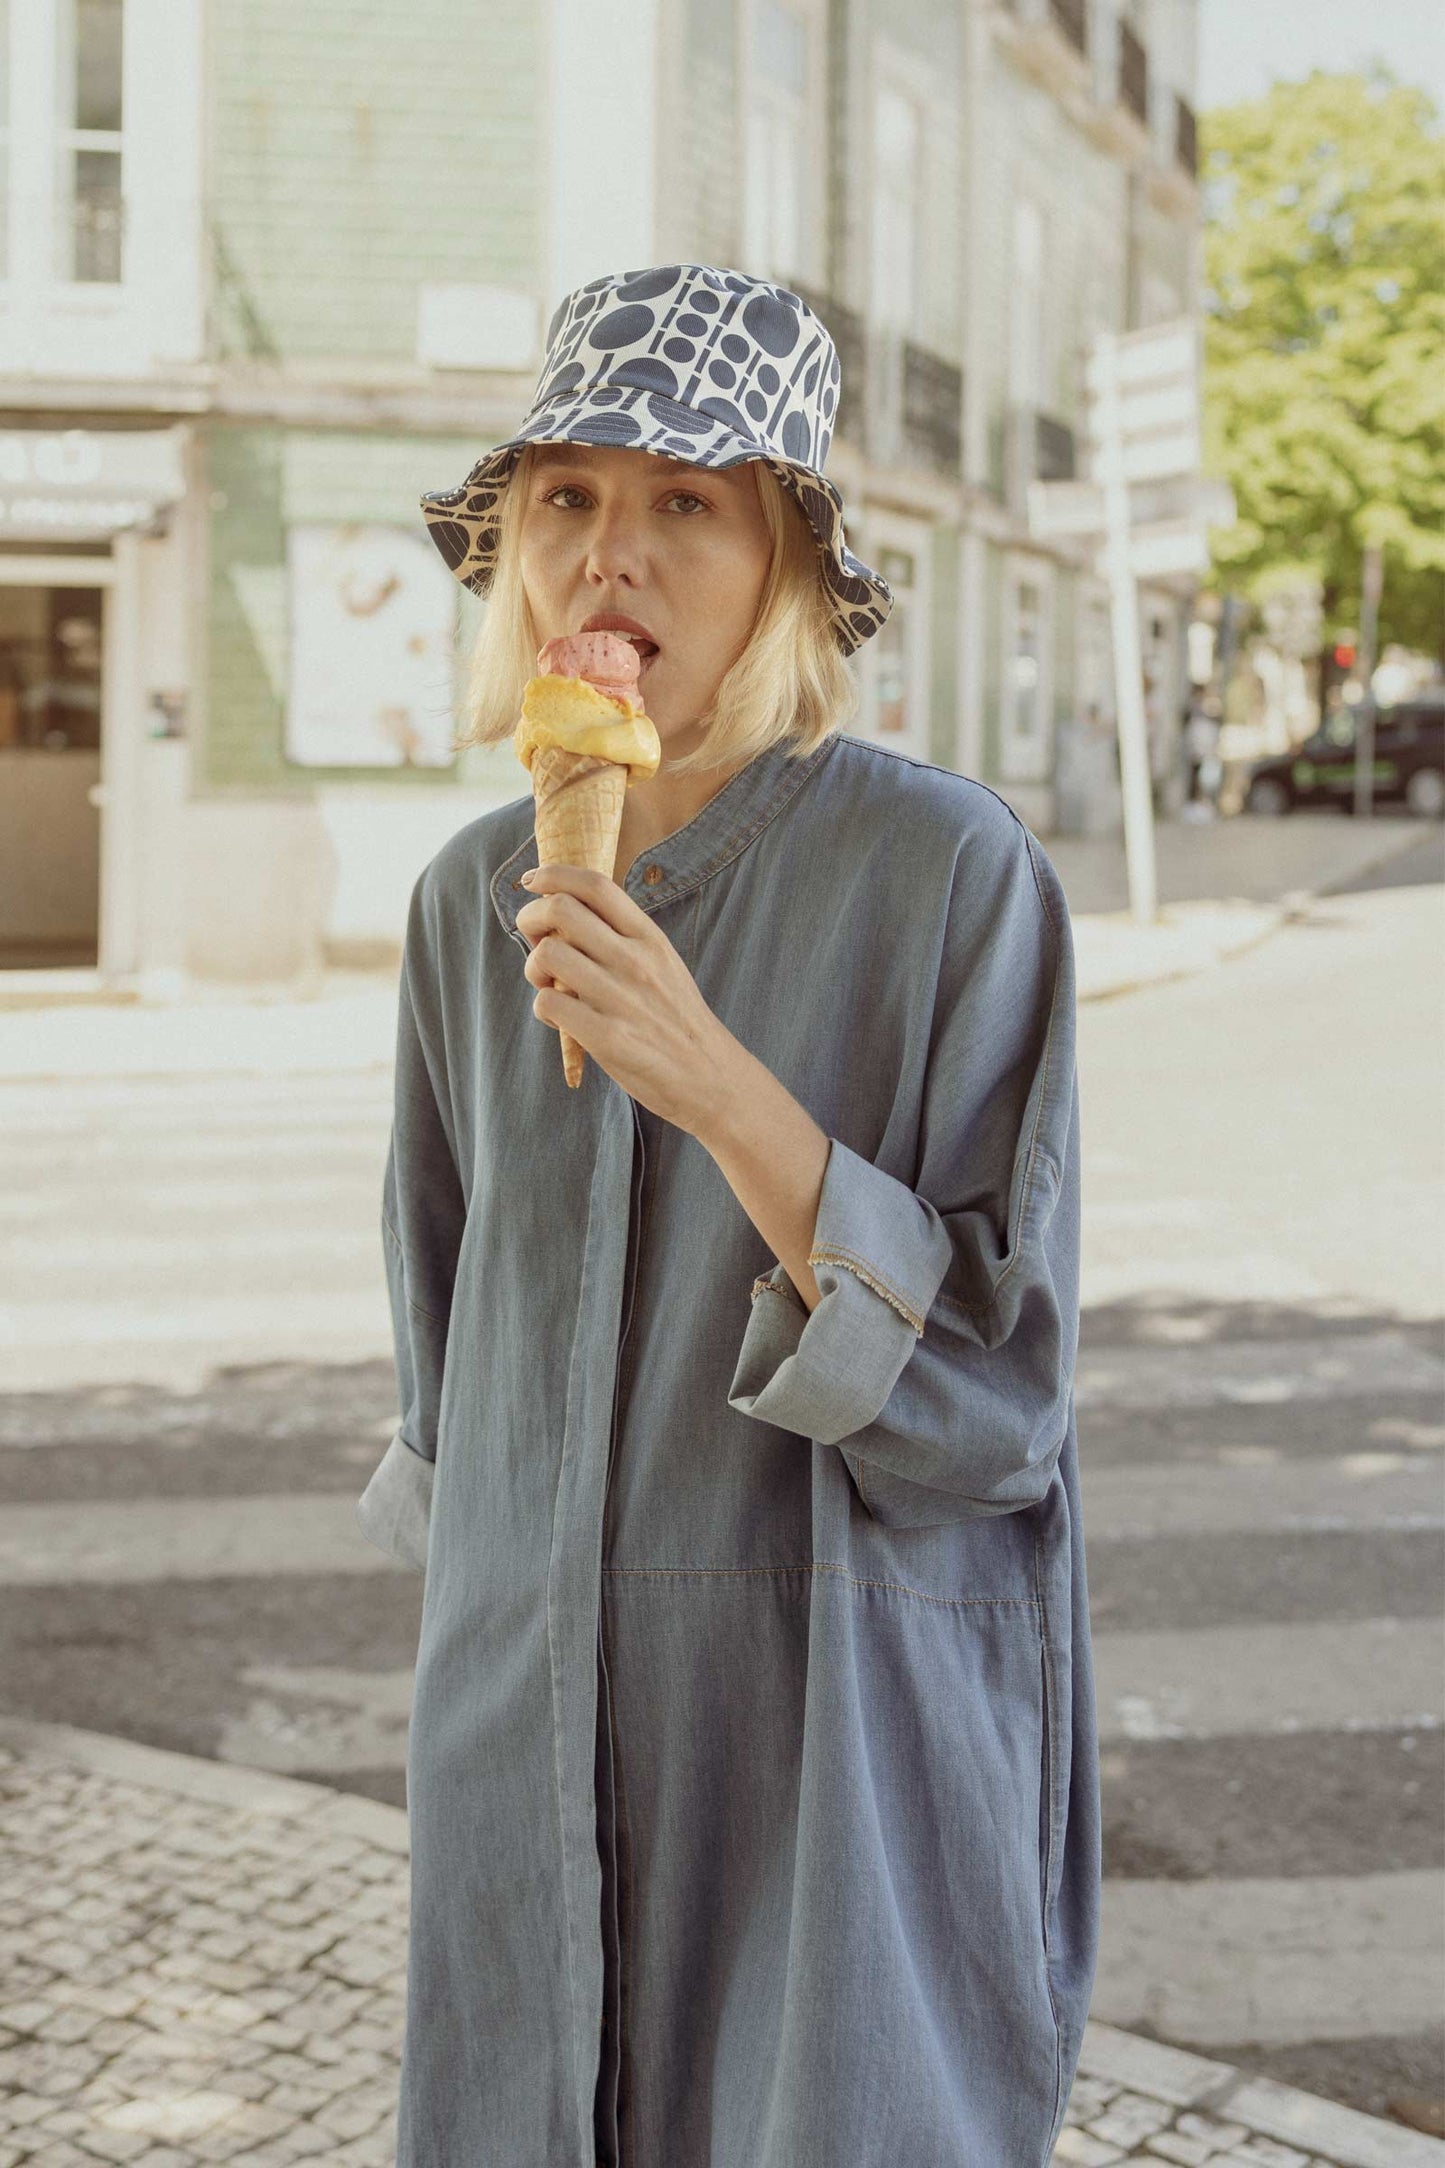 Model having ice cream and wearing a 10 to 10 denim shirt dress and hat